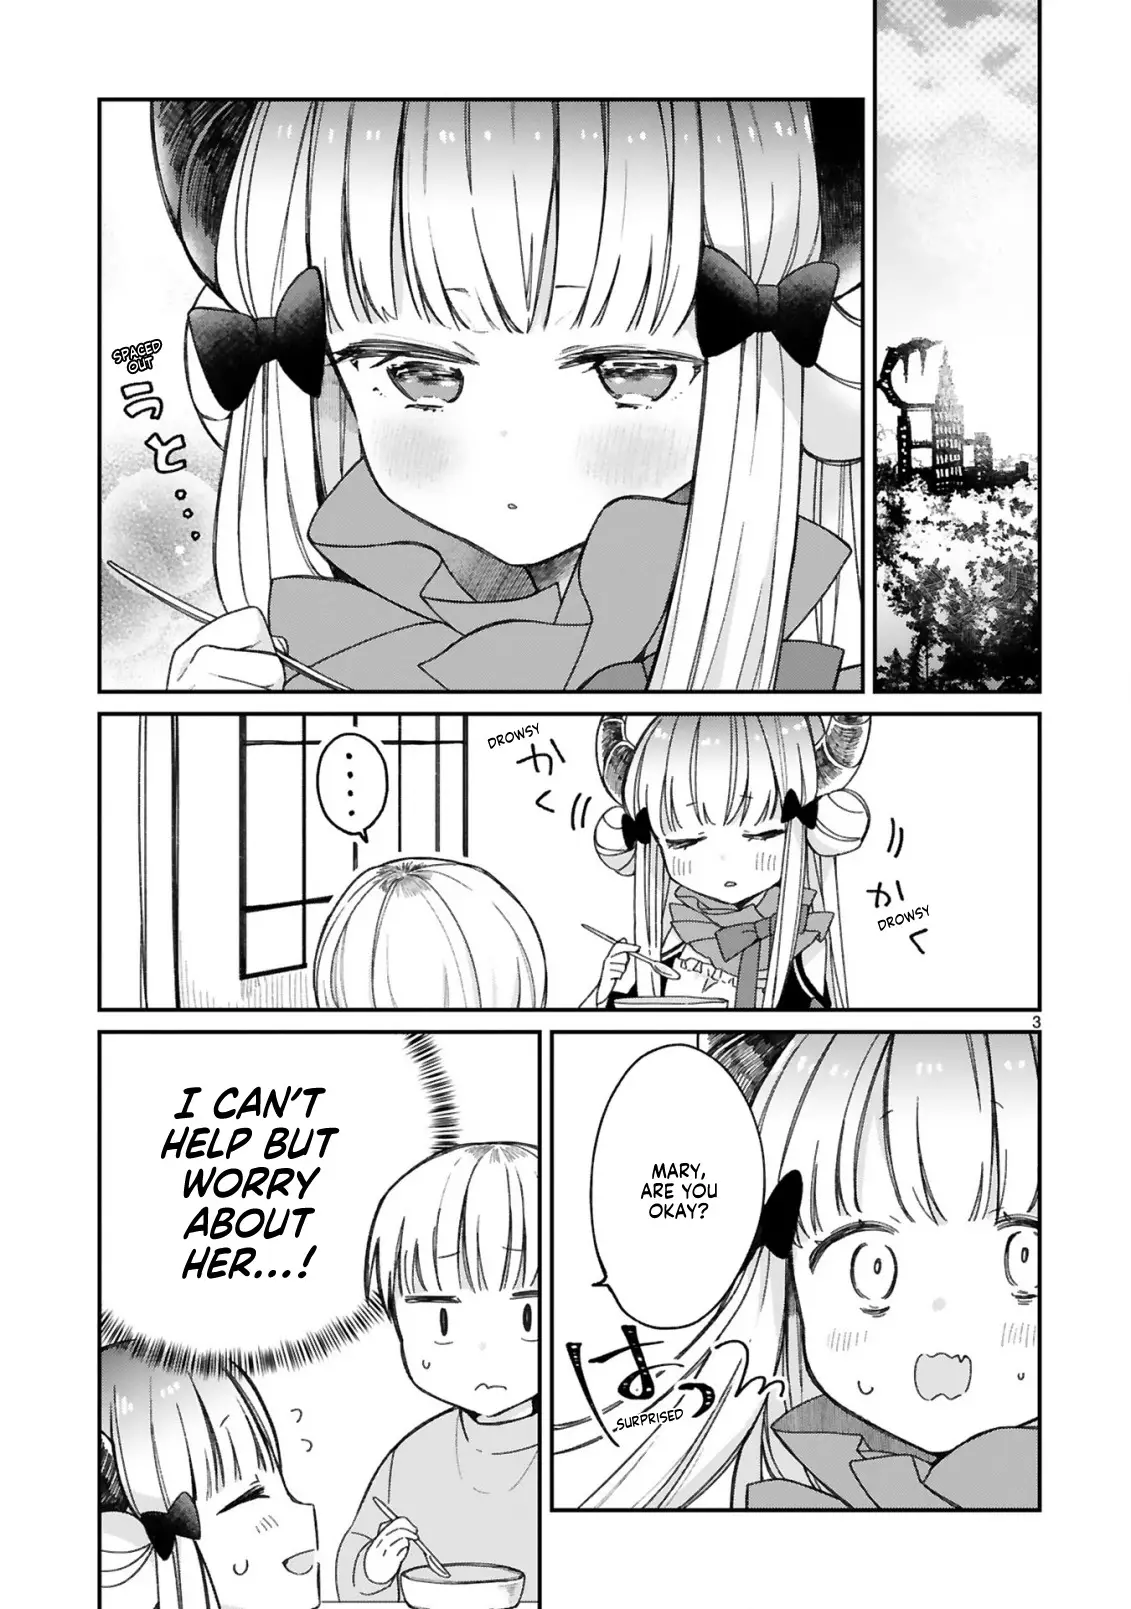 I Was Summoned By The Demon Lord, But I Can't Understand Her Language - 11 page 5